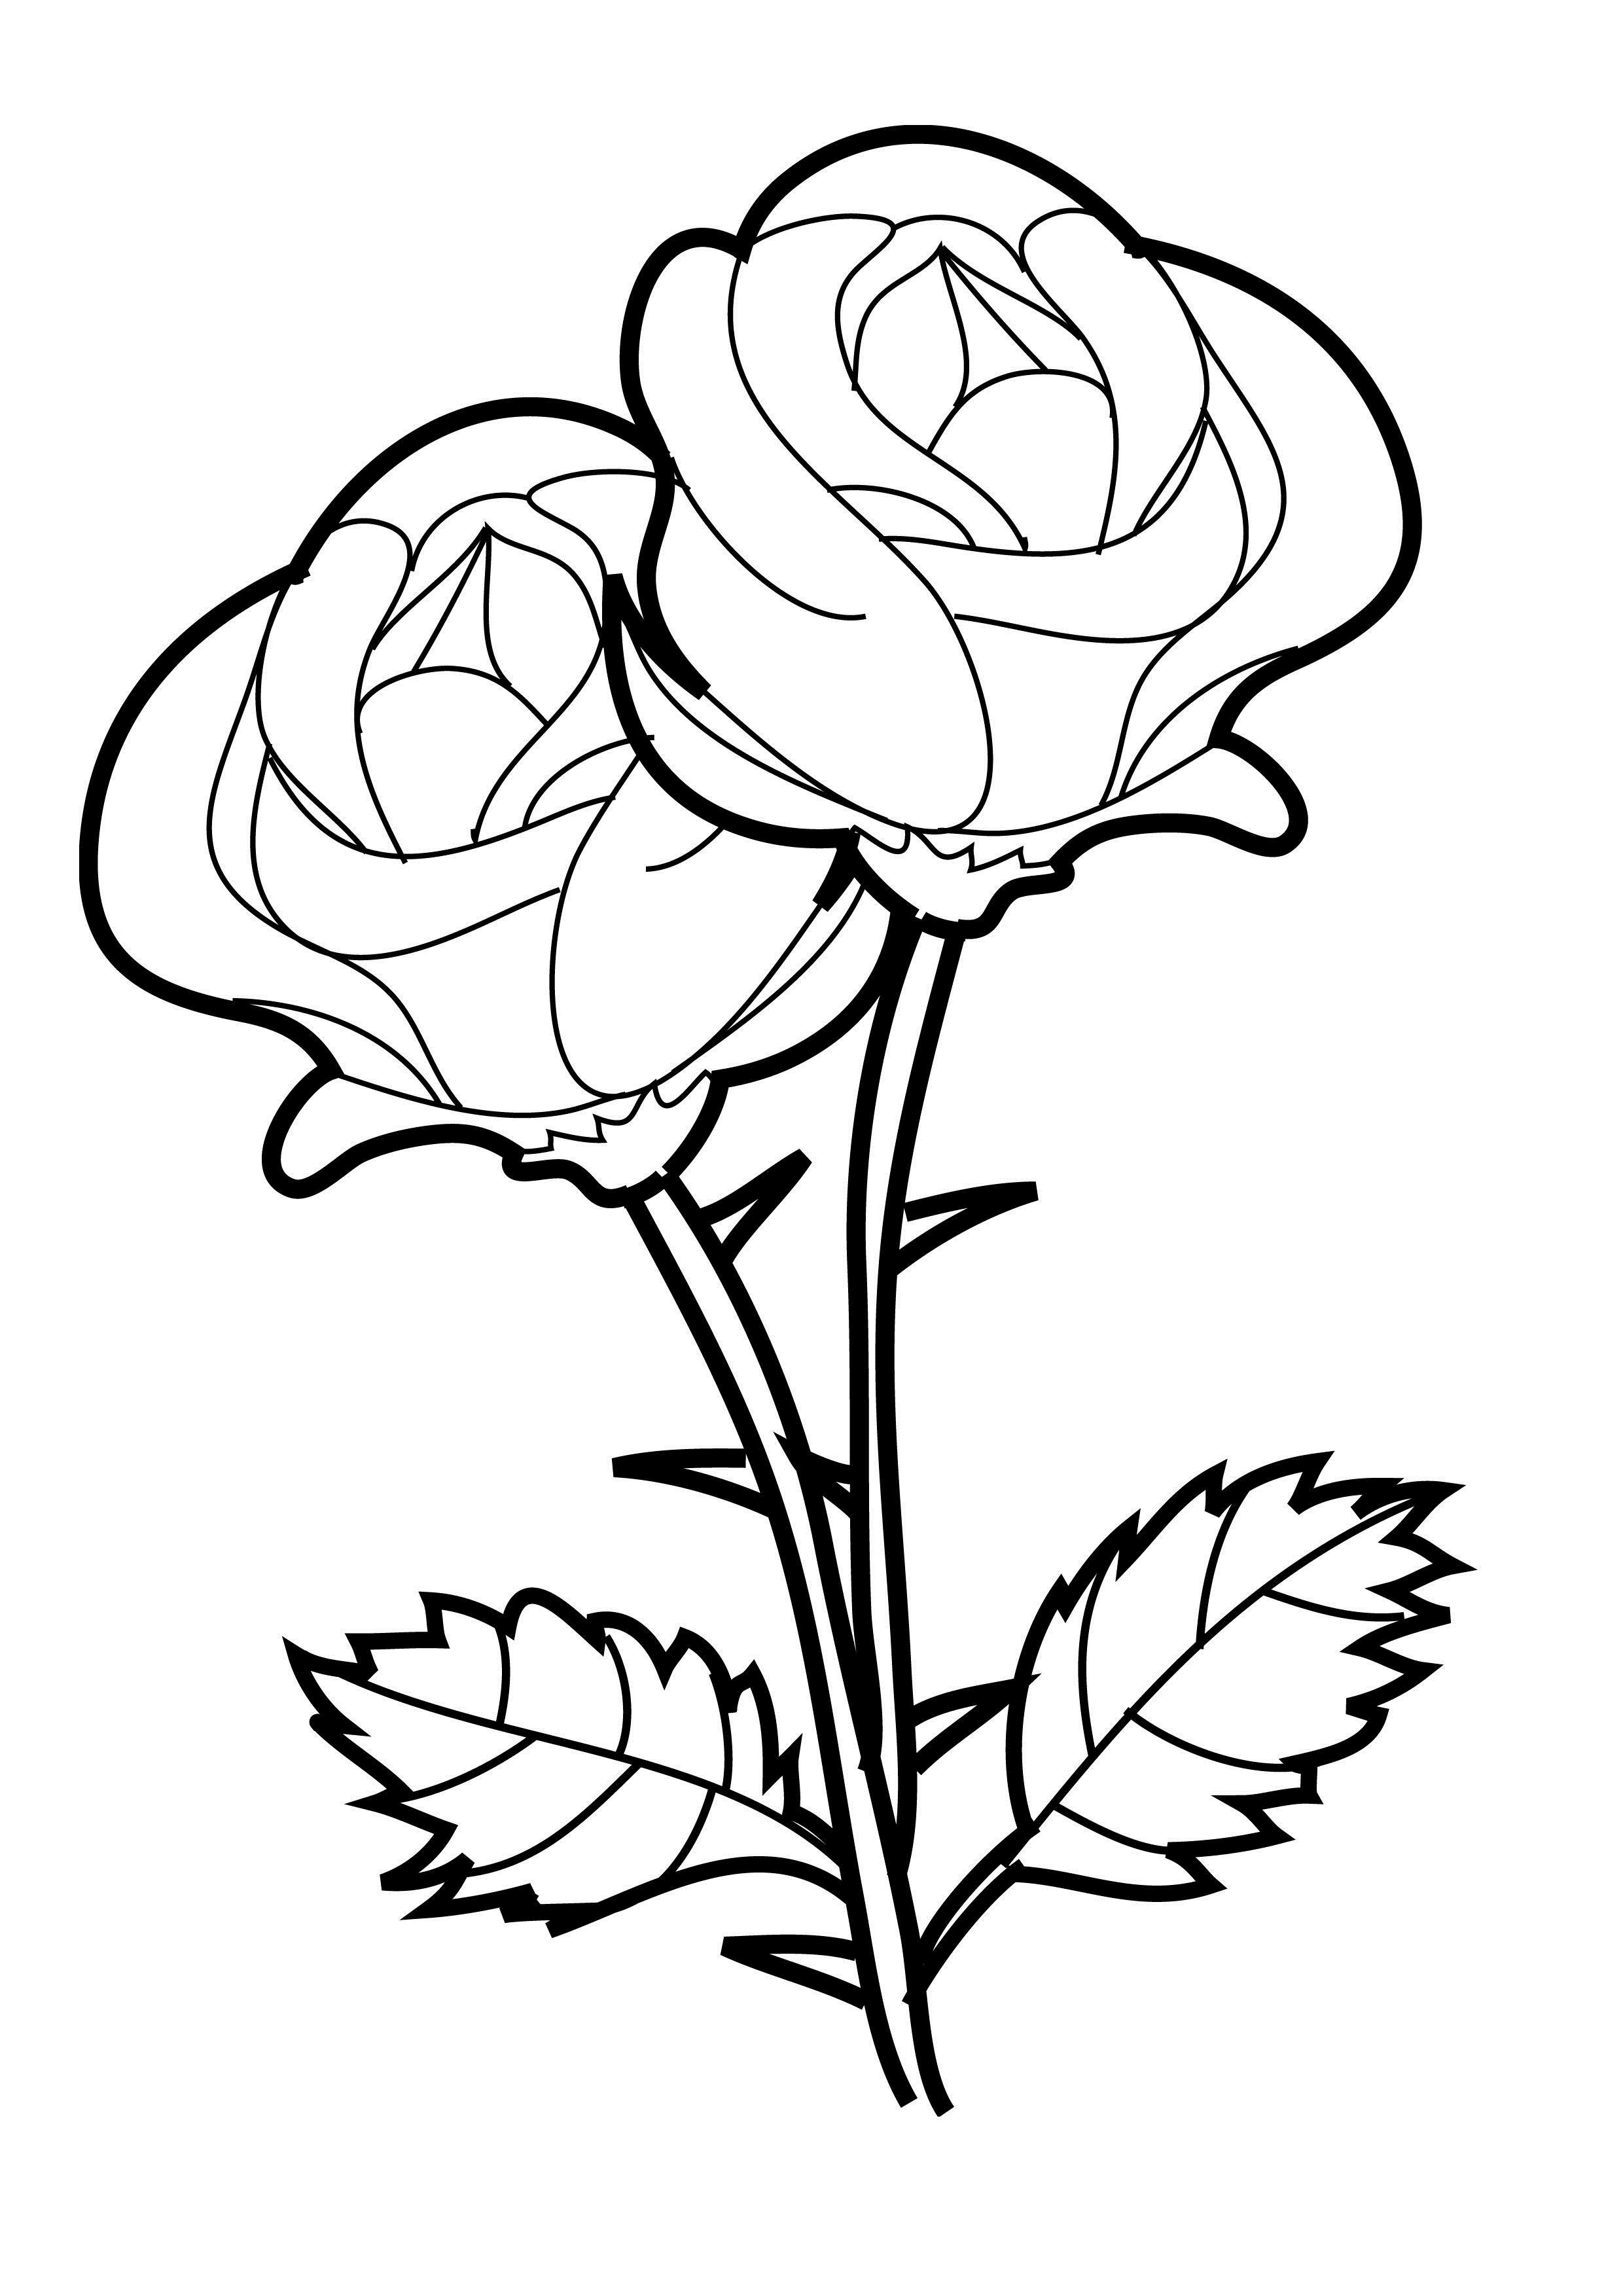 Beautiful Rose Coloring Pages 24 In Line Drawings With Rose ...